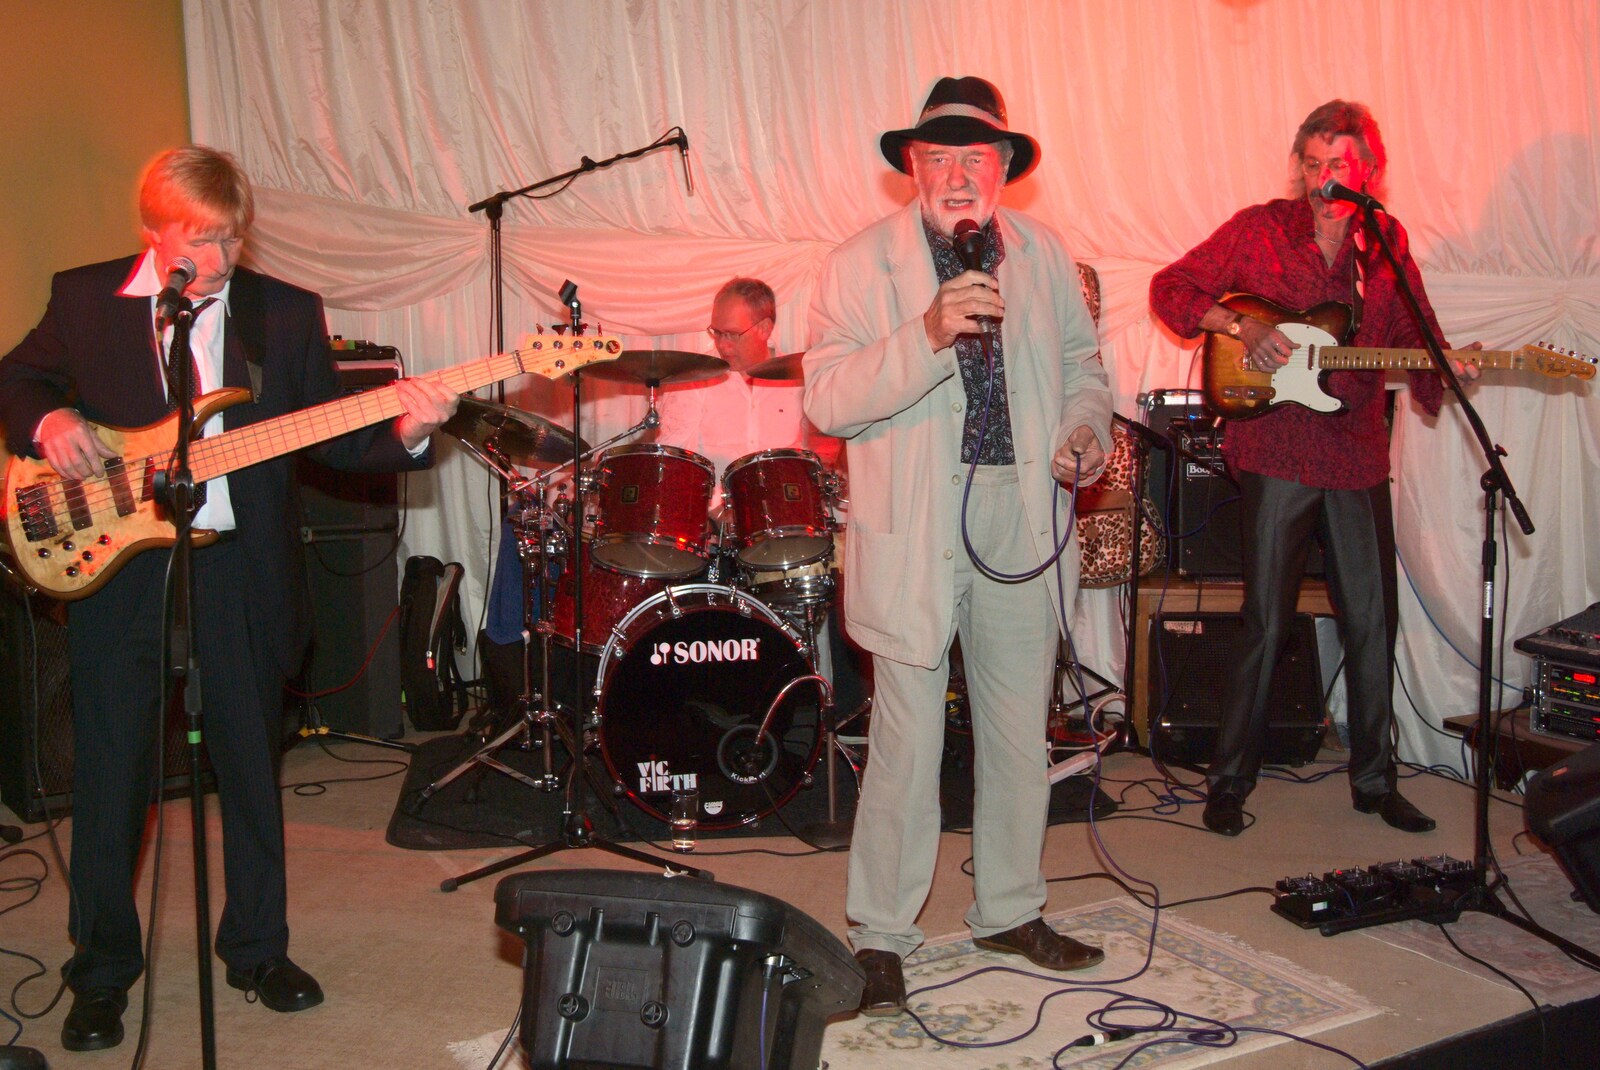 Budgie Coleman and the Mustard Men from Rob and Wilma's Wedding, Thornham and Thrandeston, Suffolk - 6th August 2011